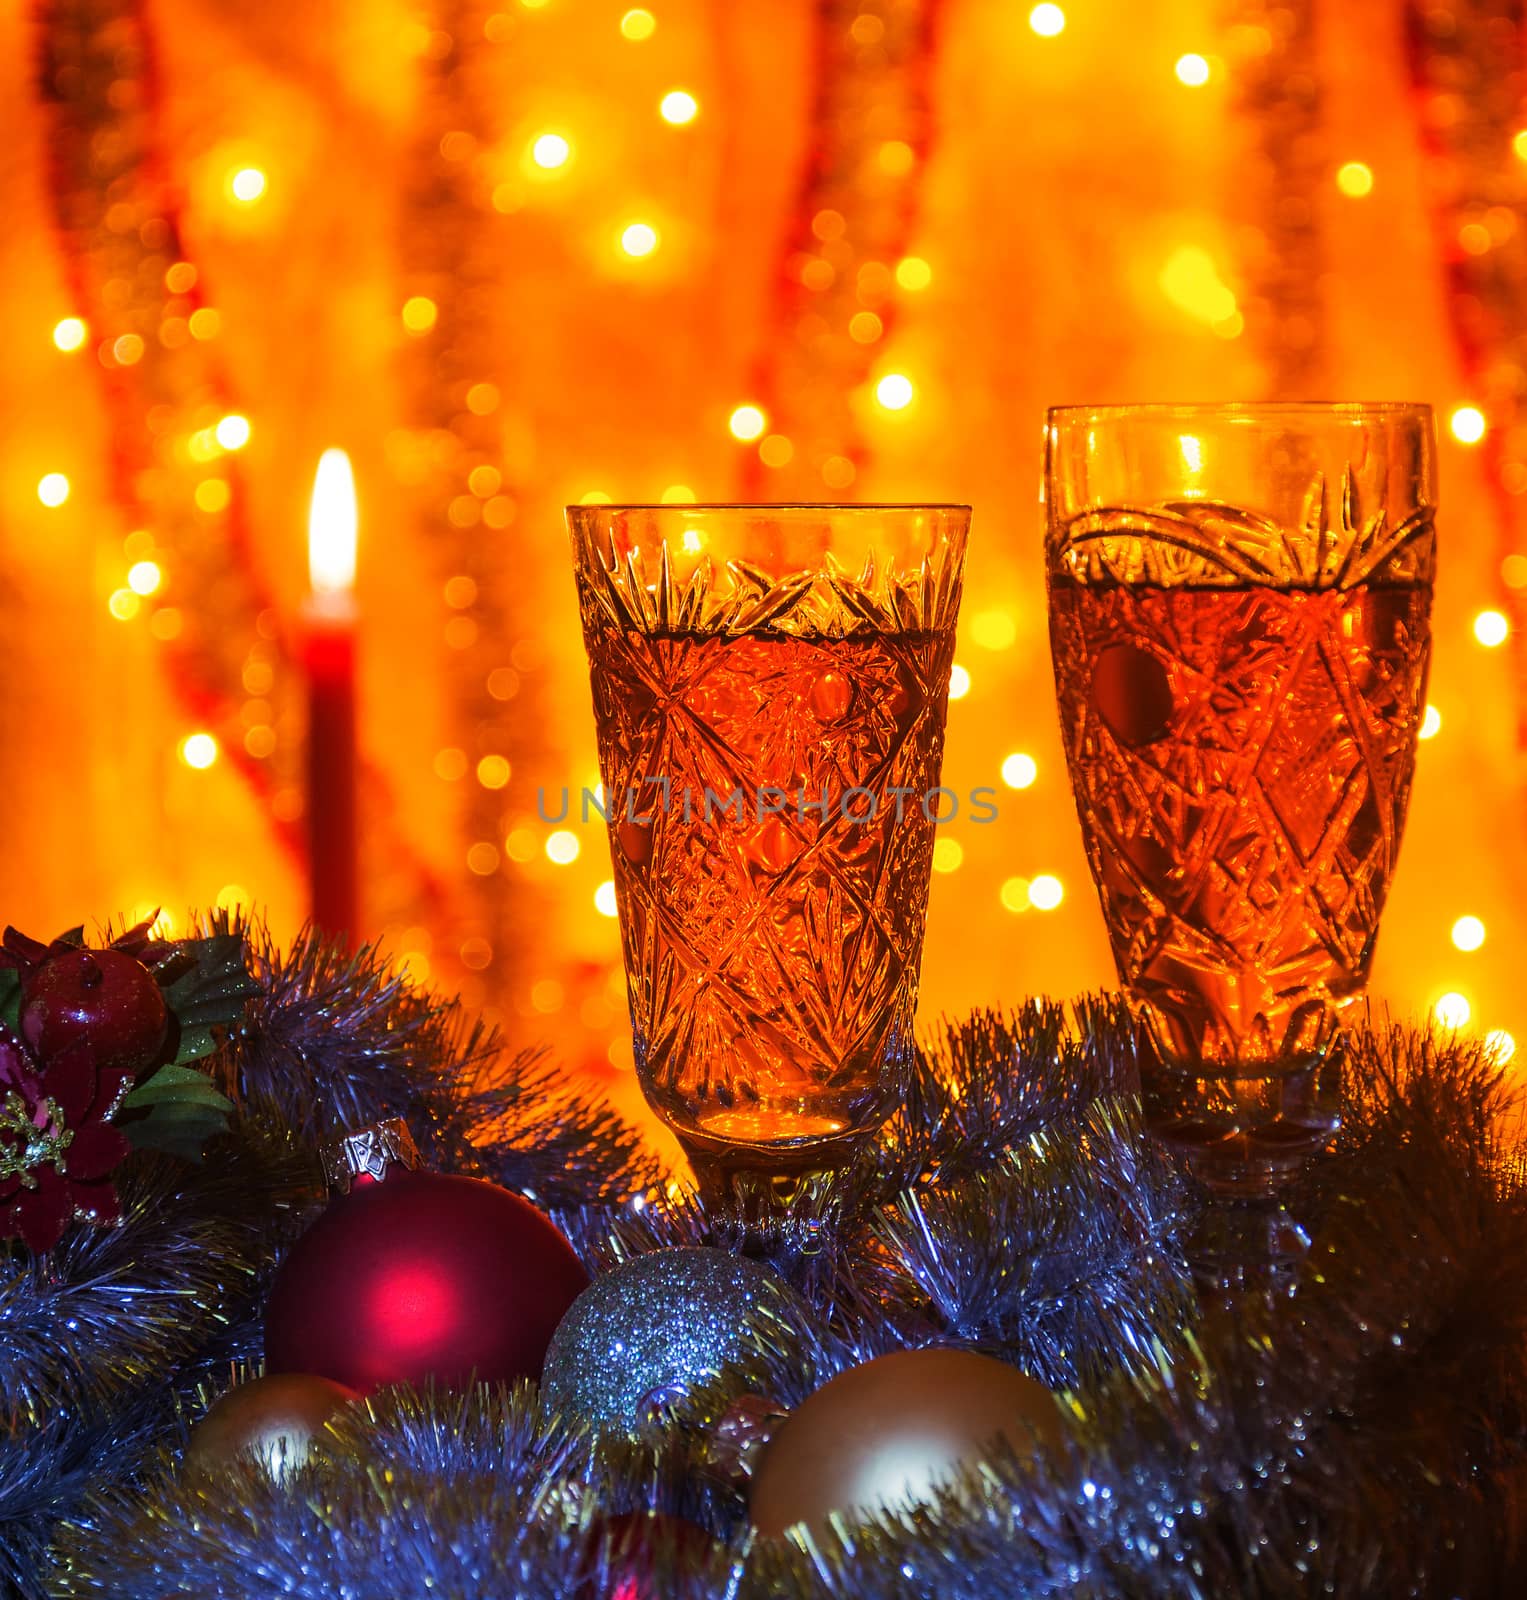 Some wine glasses of champagne lying Christmas balls and tinsel. On blurred background is visible burning candle.

